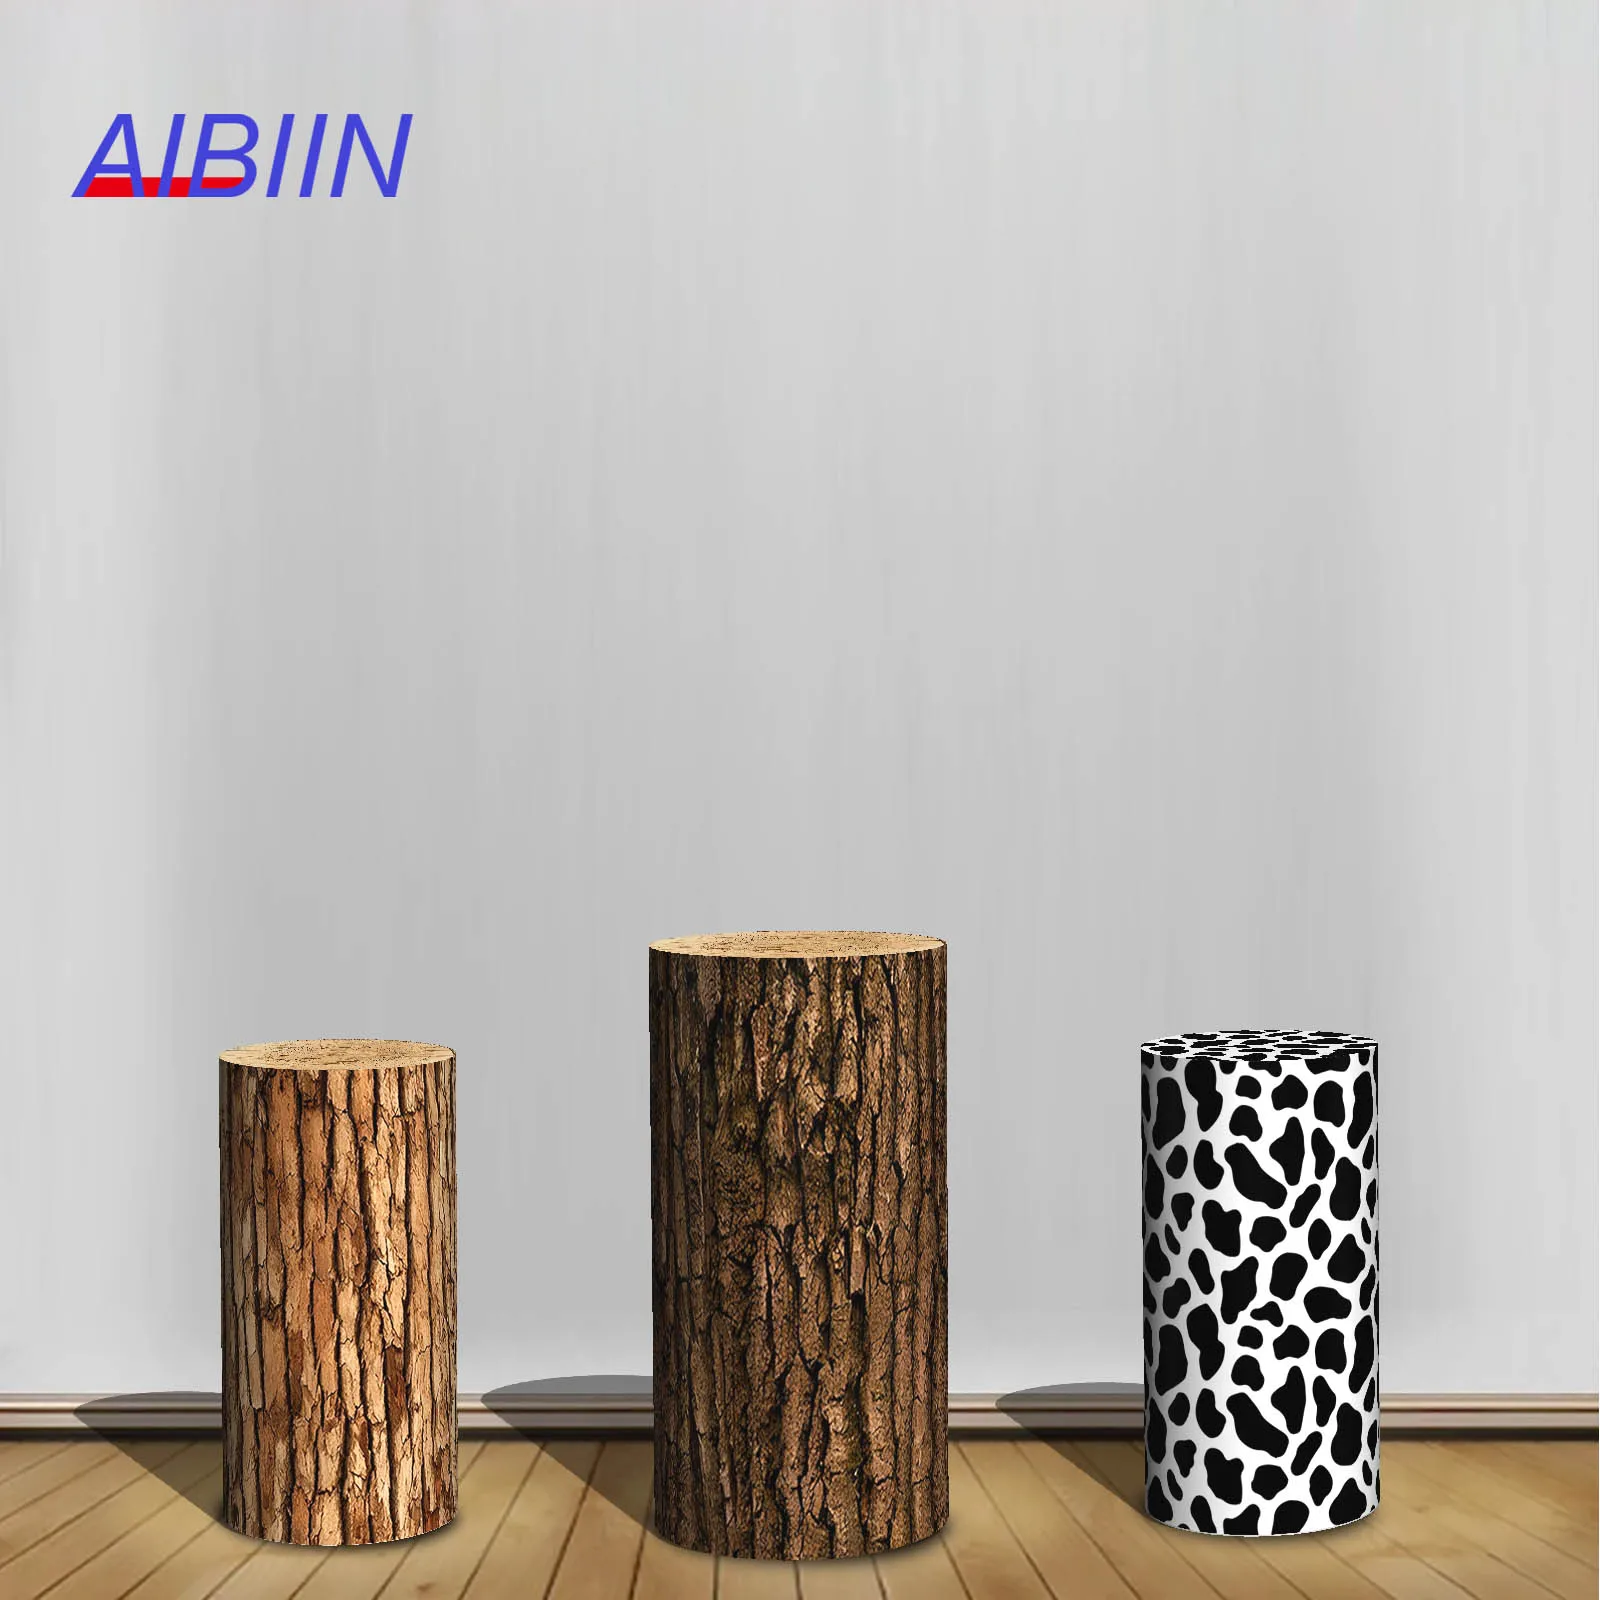 

AIBIIN Cylinder Backdrop Cover Wood Bark Cow Texture Elastic Cake Dessert Circular Column Cover Baby Shower Birthday Party Decor